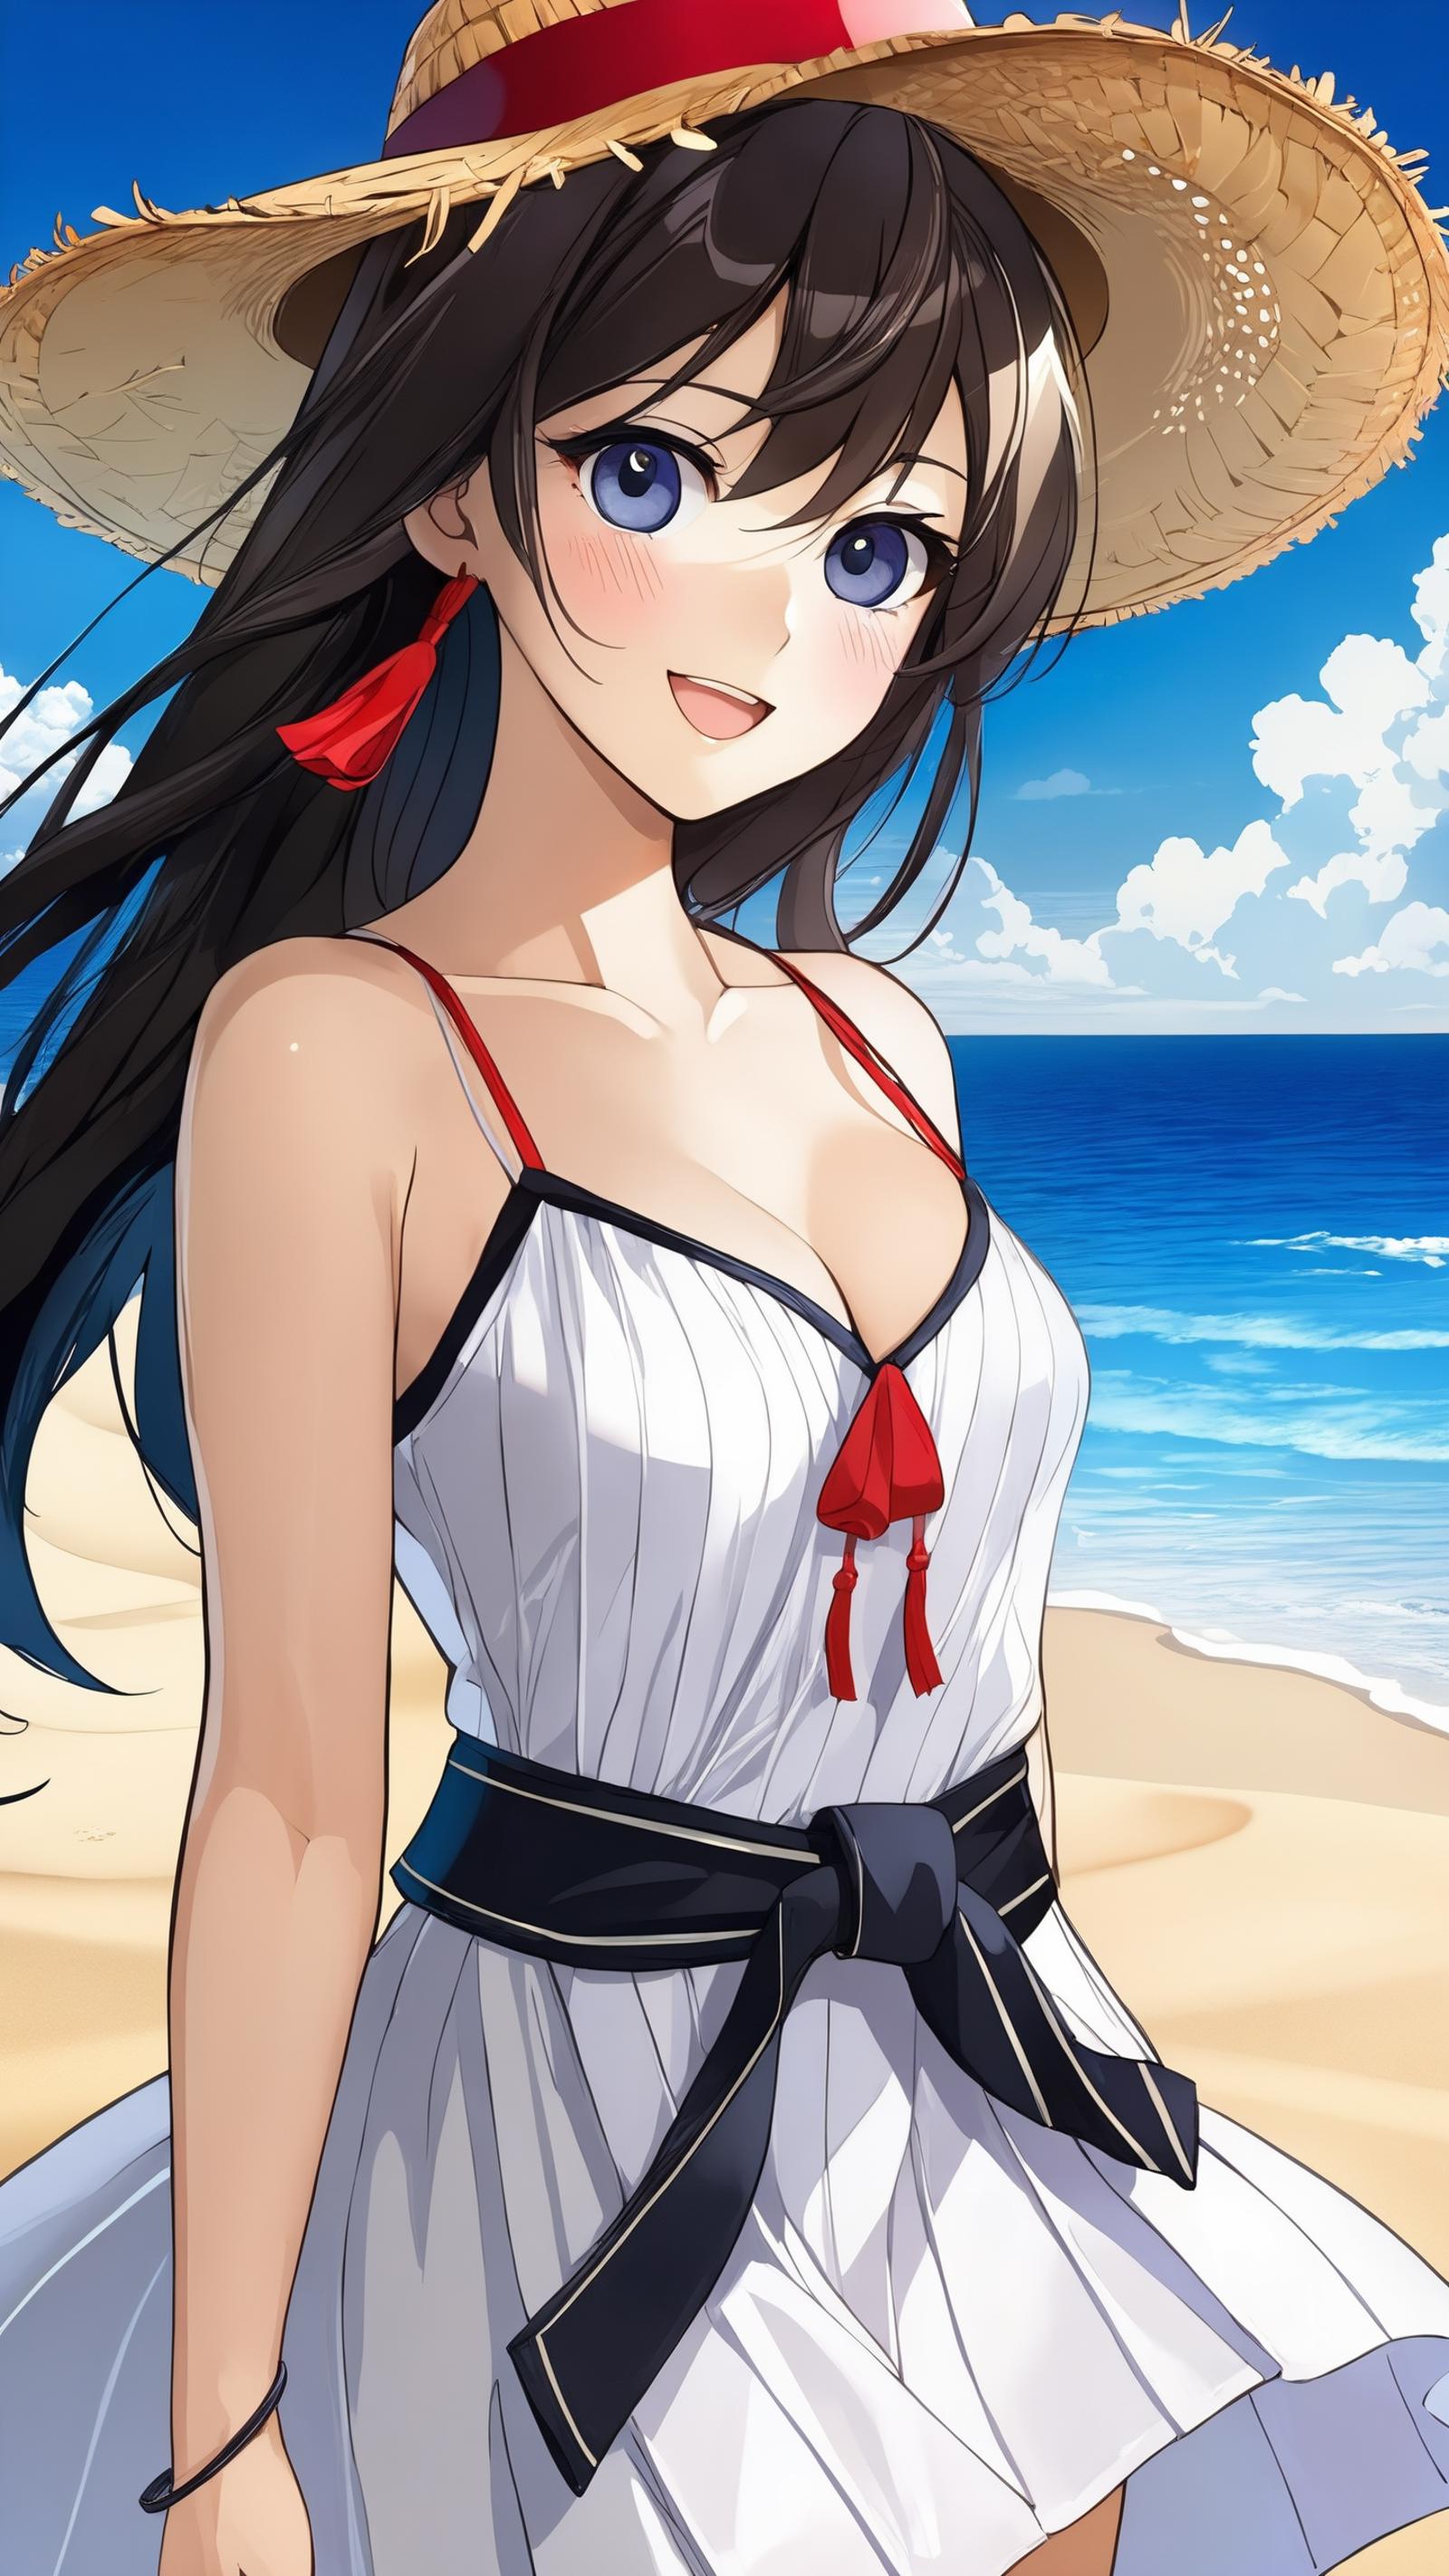 A cartoon image of a woman wearing a white and red dress, standing on a beach.